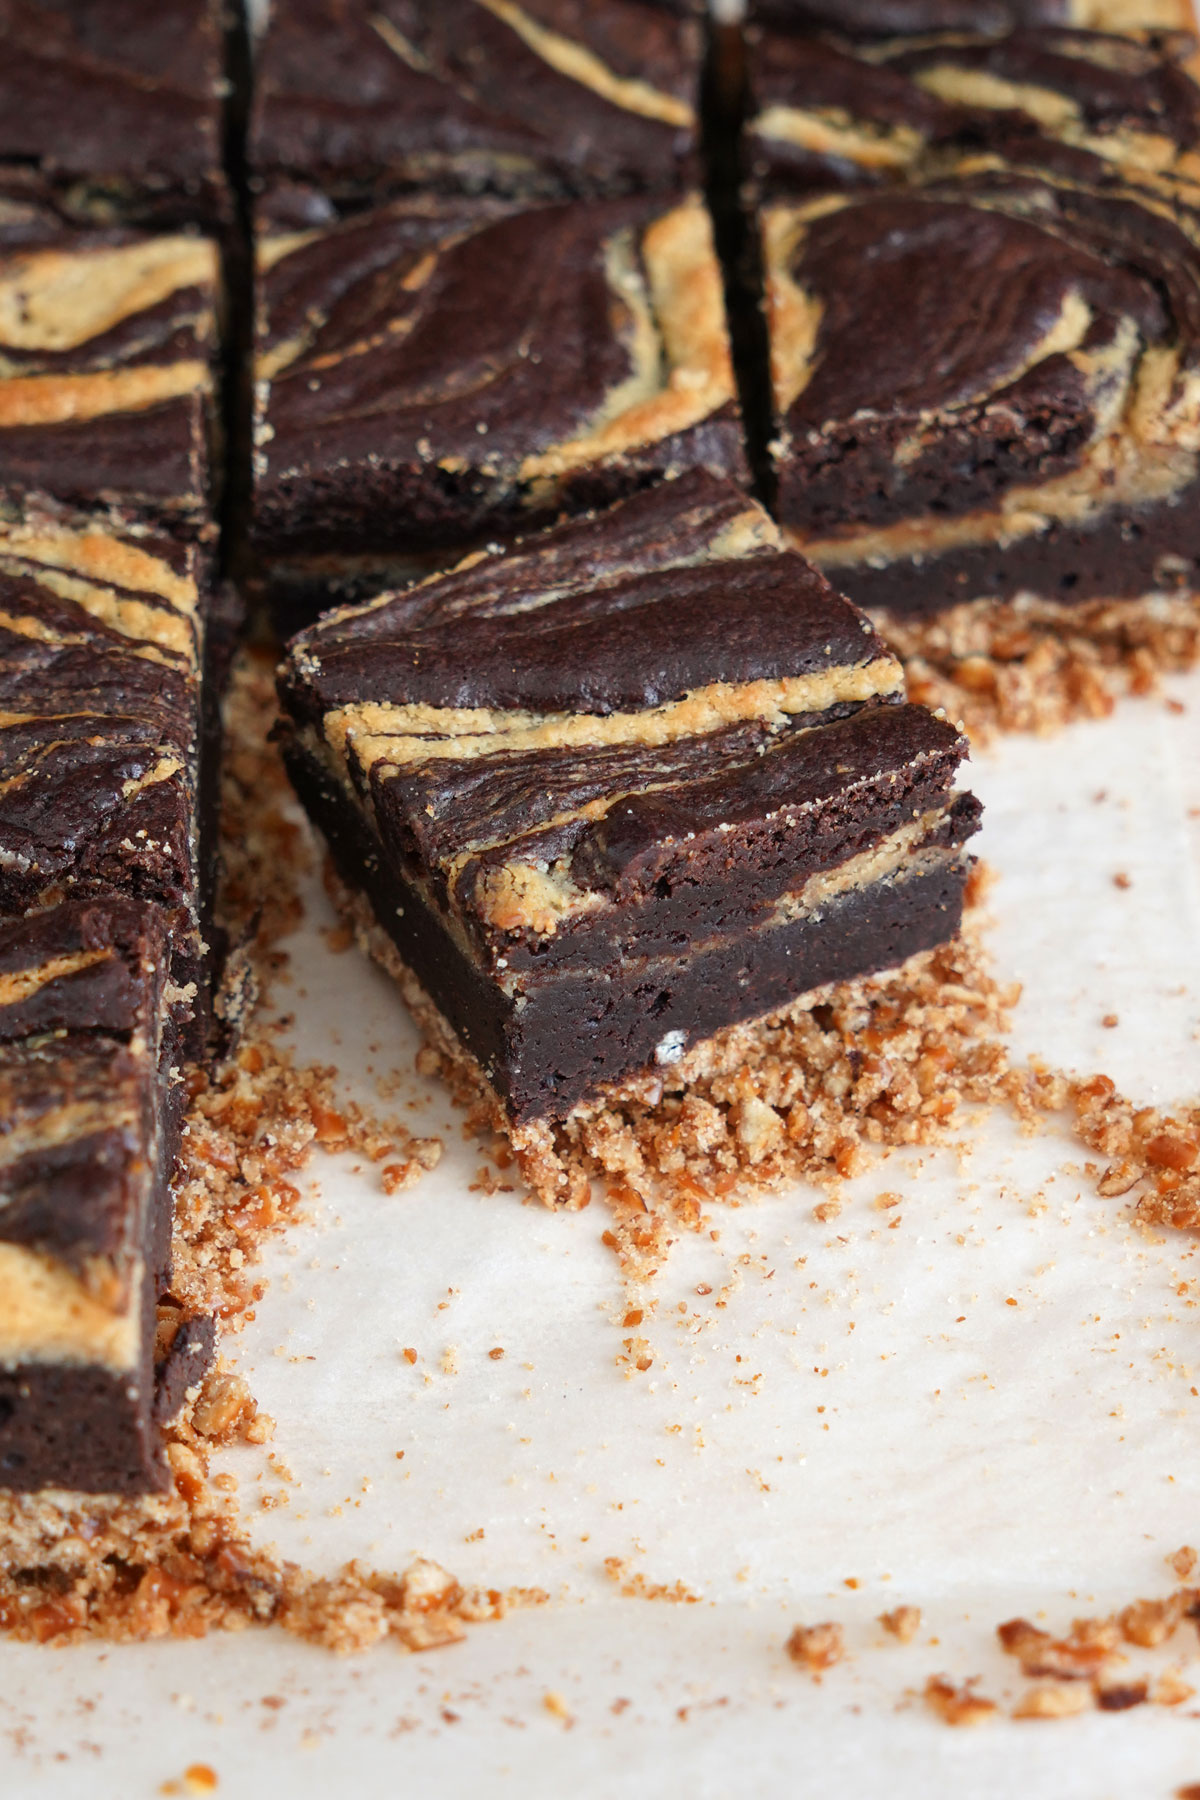 Peanut butter cheesecake brownie on parchment paper.